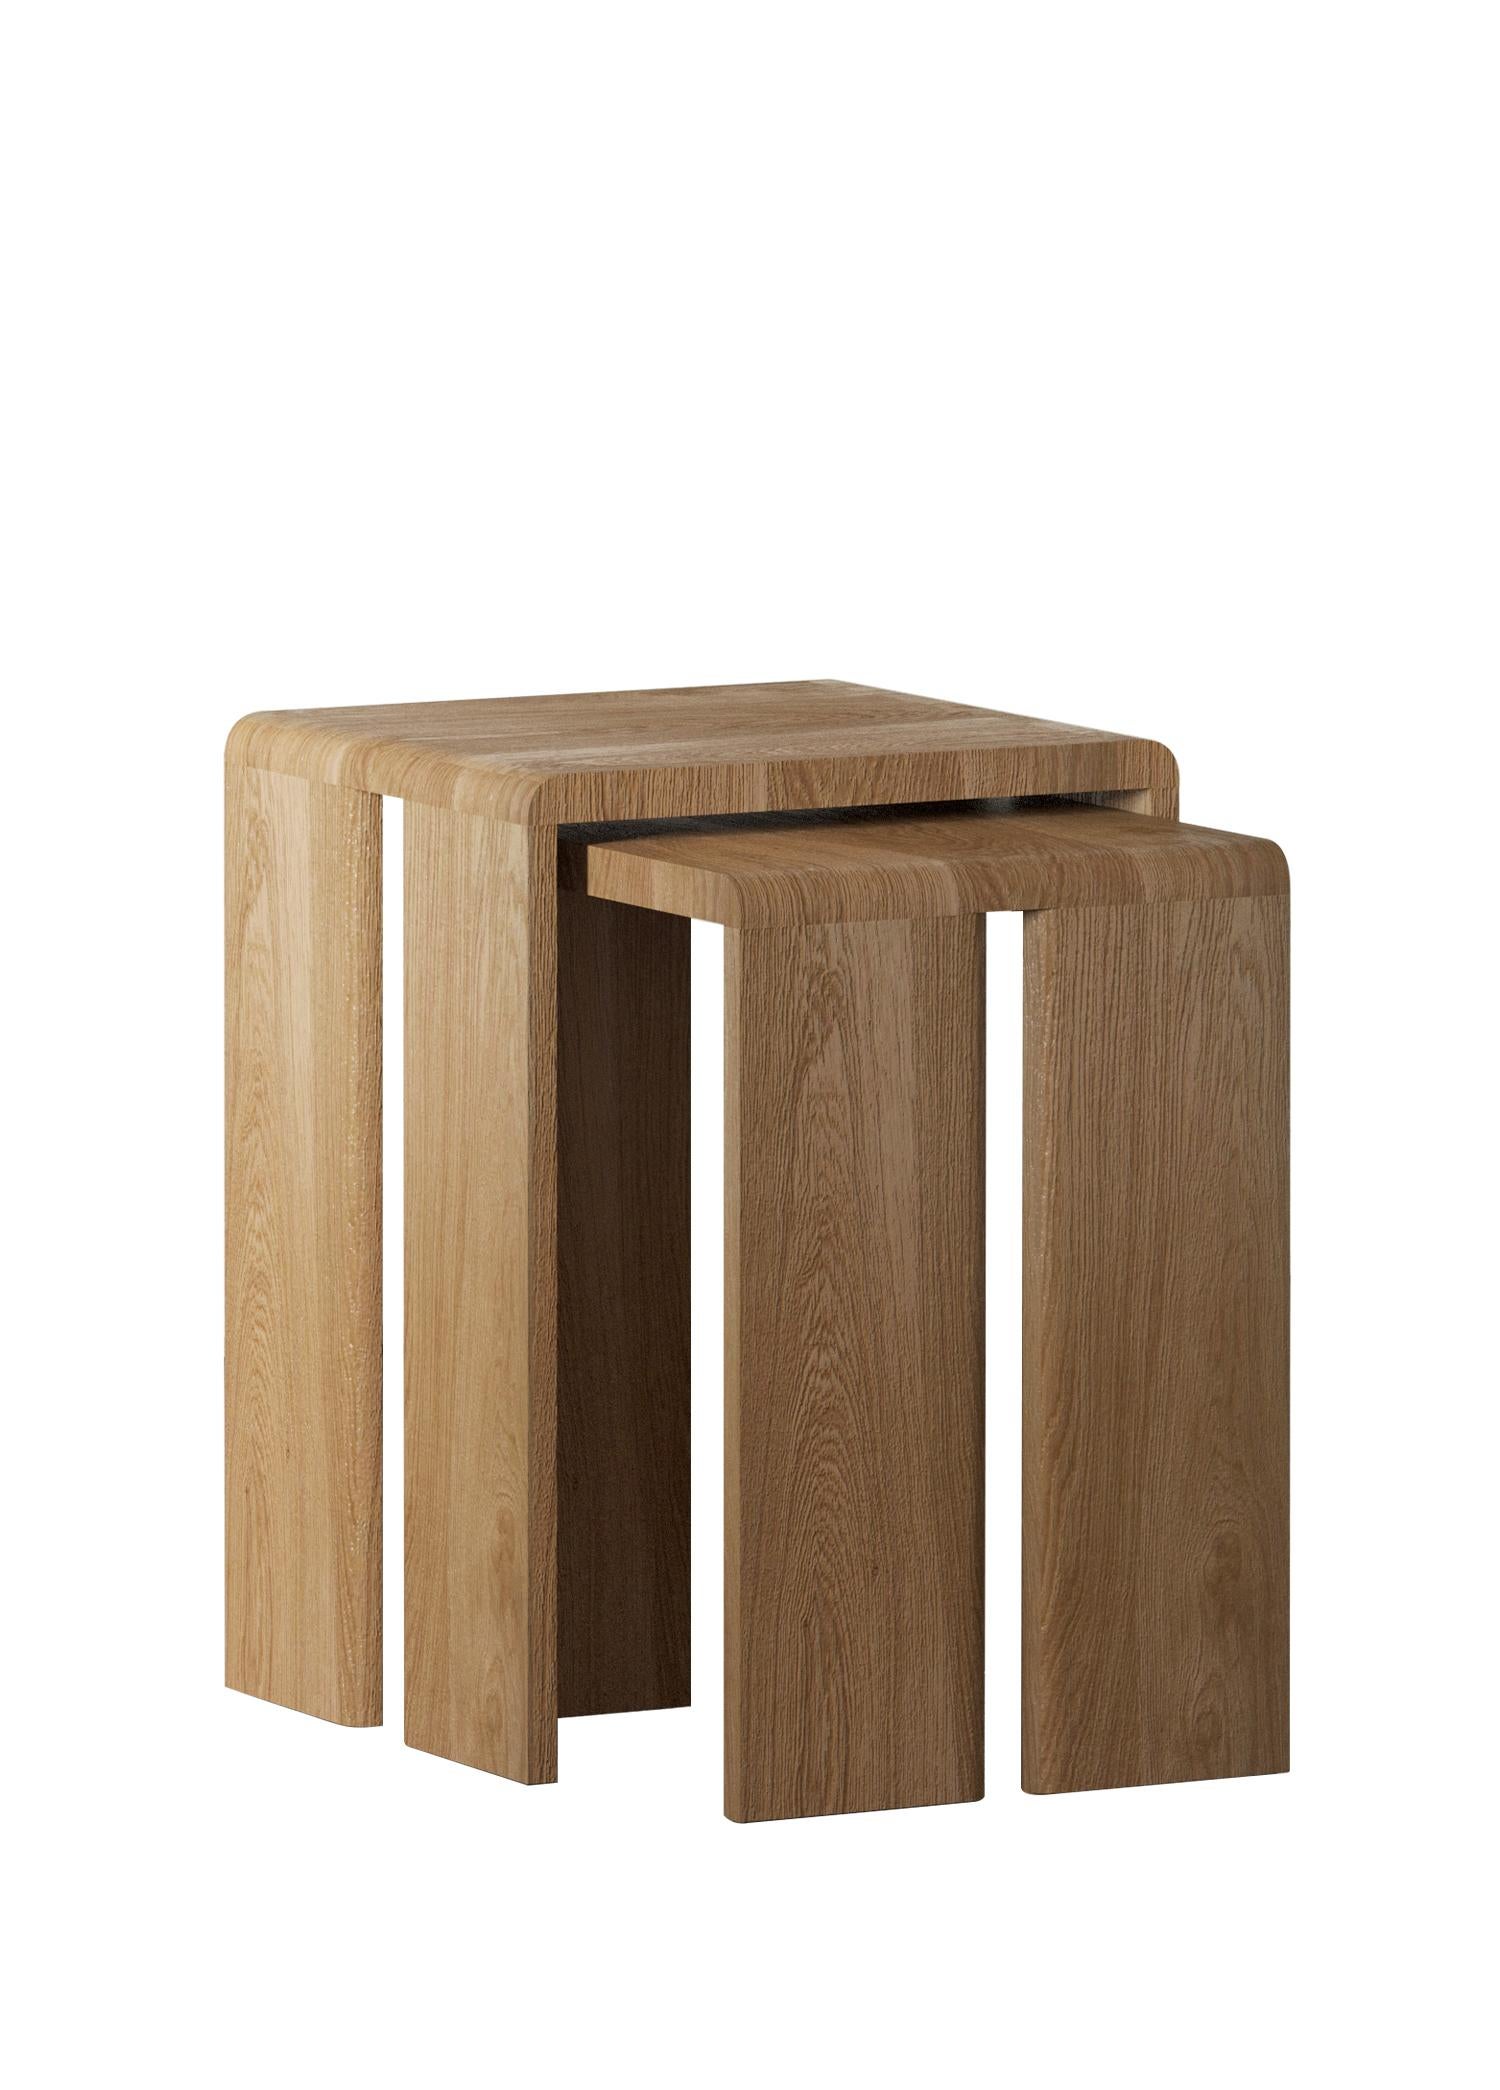 Turkish Plus Oak side table set of 2 by Hermhaus For Sale